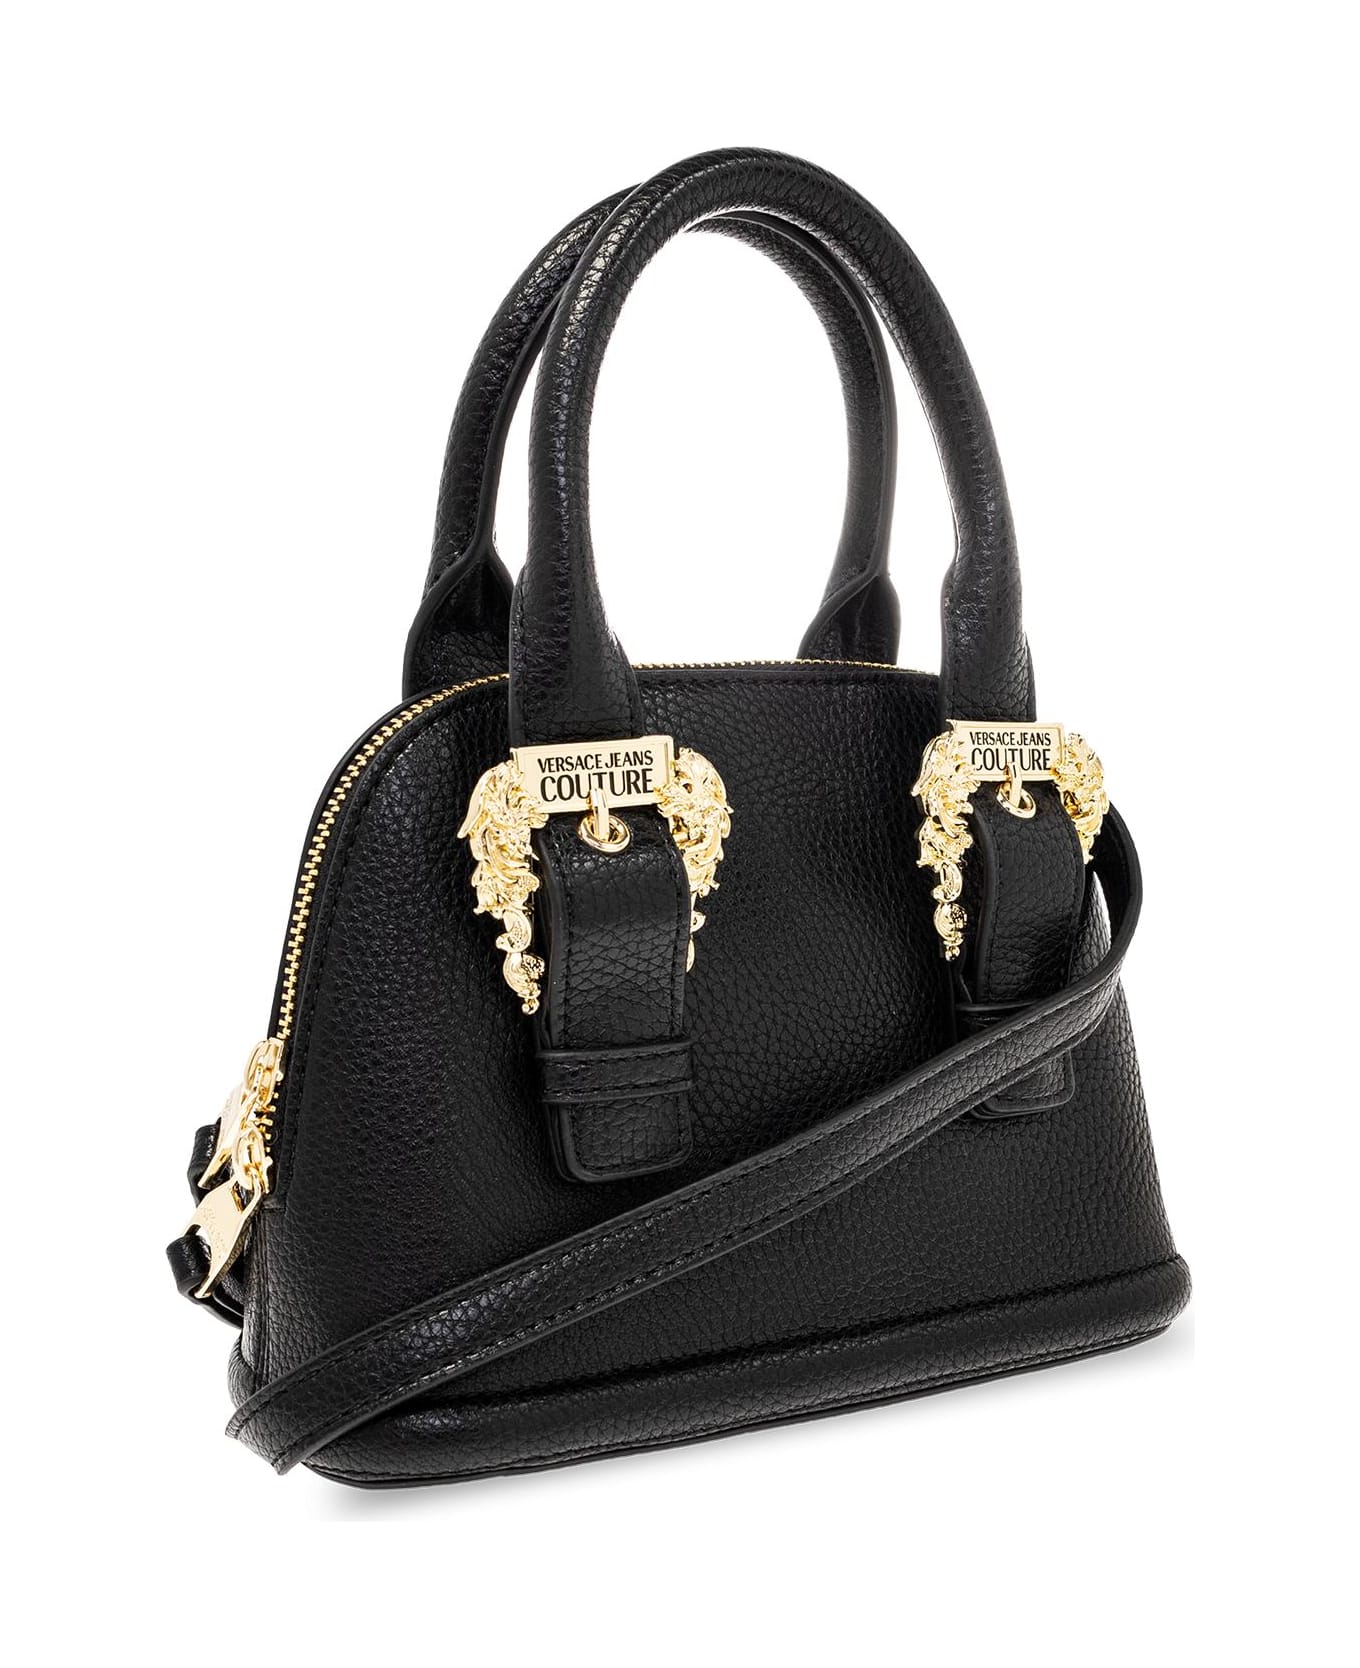 Versace Jeans Couture Bag - NERO トートバッグ